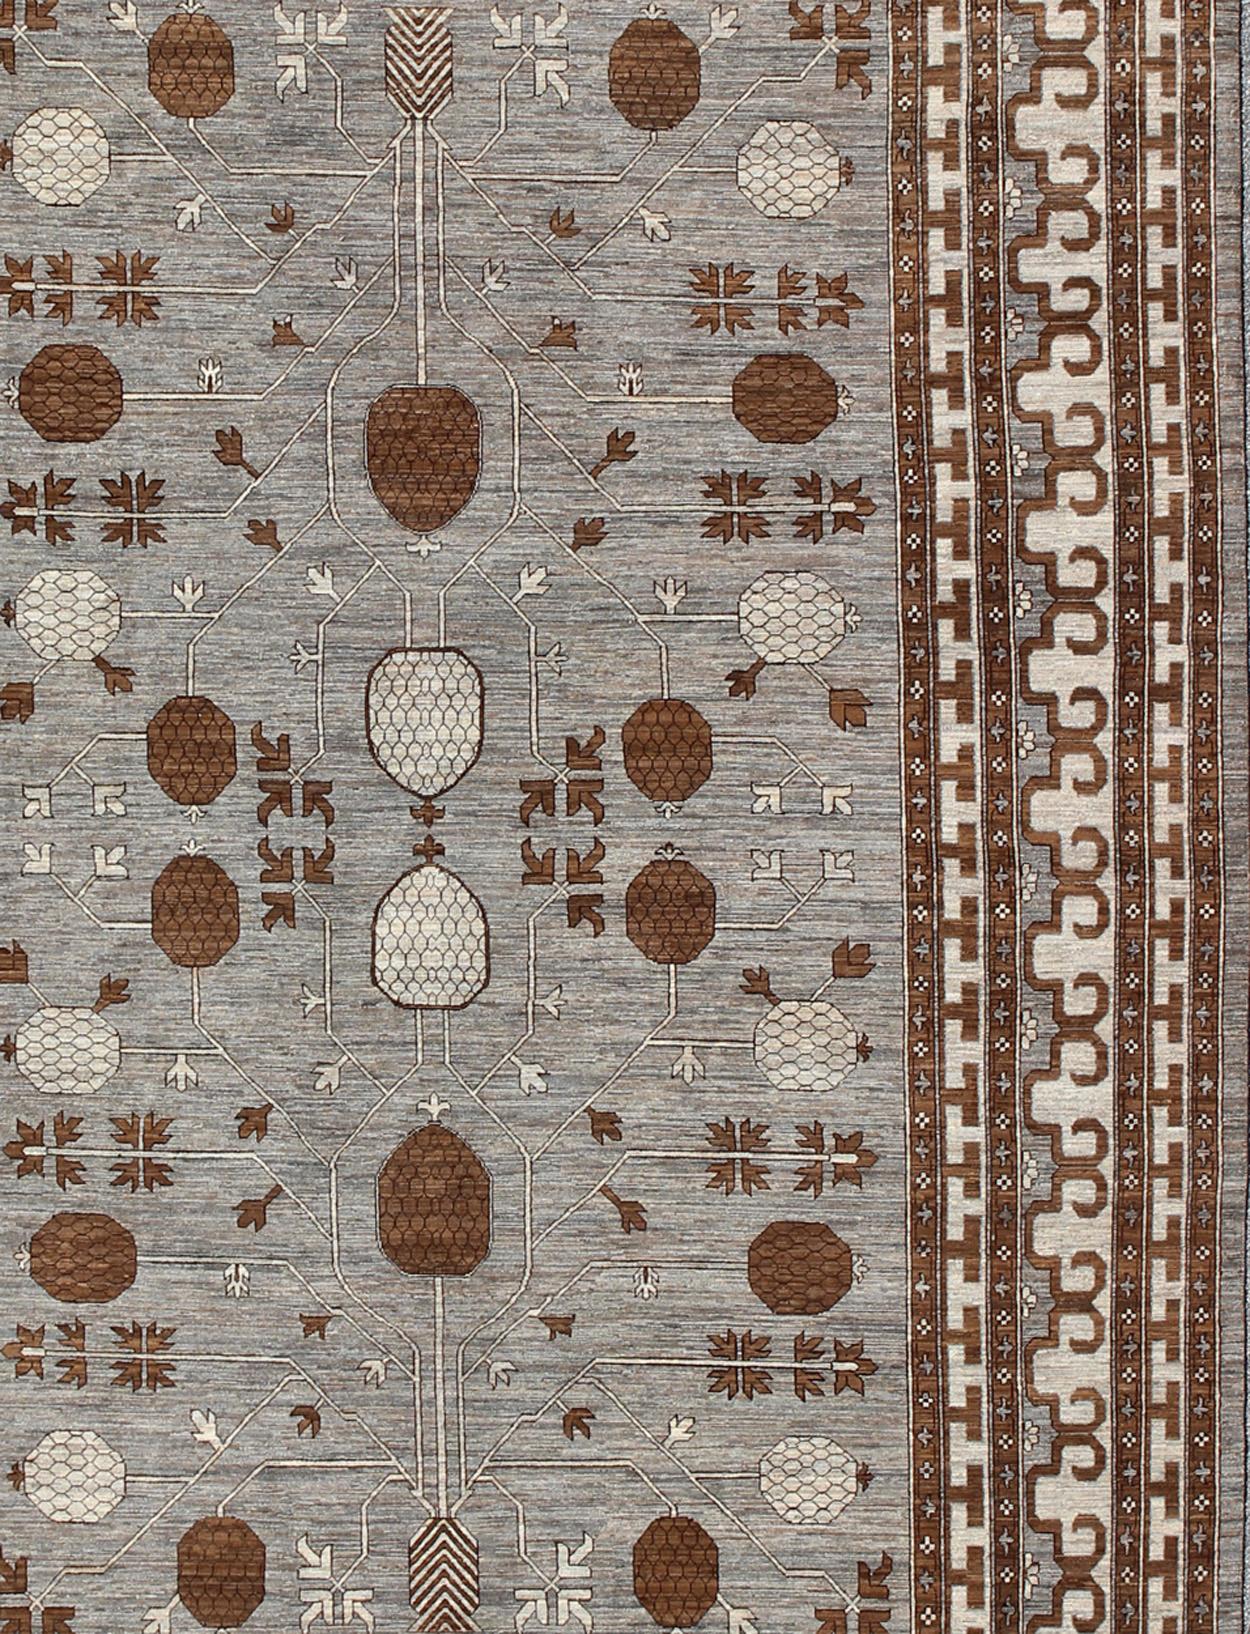 Large Khotan rug with all over Pomegranate Design. Keivan Woven Arts / rug MP-1709-1973, country of origin / type: Afghanistan / Khotan
Measures: 10'2 x 14'6.
This Khotan features an all over design flanked by a repeating pattern in the border. The